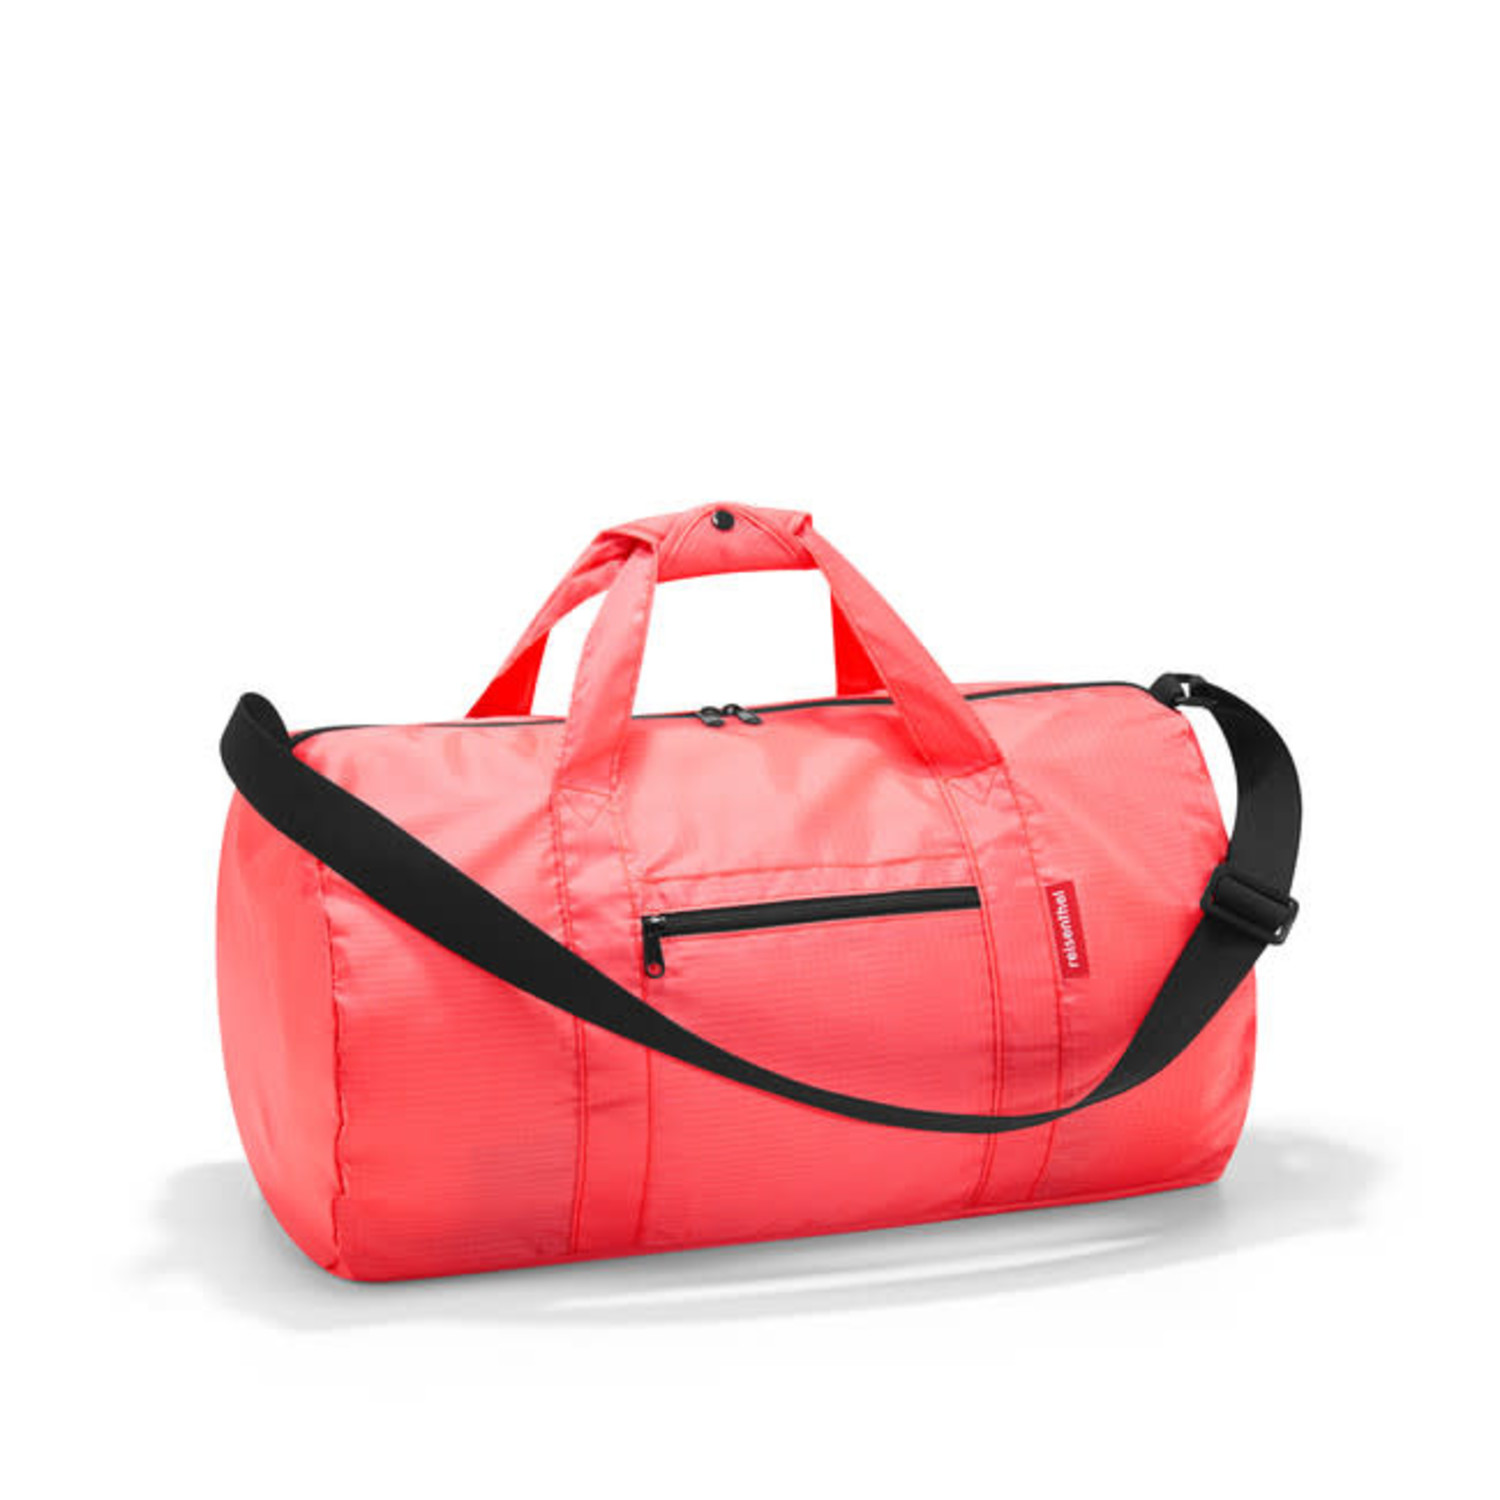 Reisenthel Mini Maxi Duffle Bag- Coral - Just Bags Luggage Center